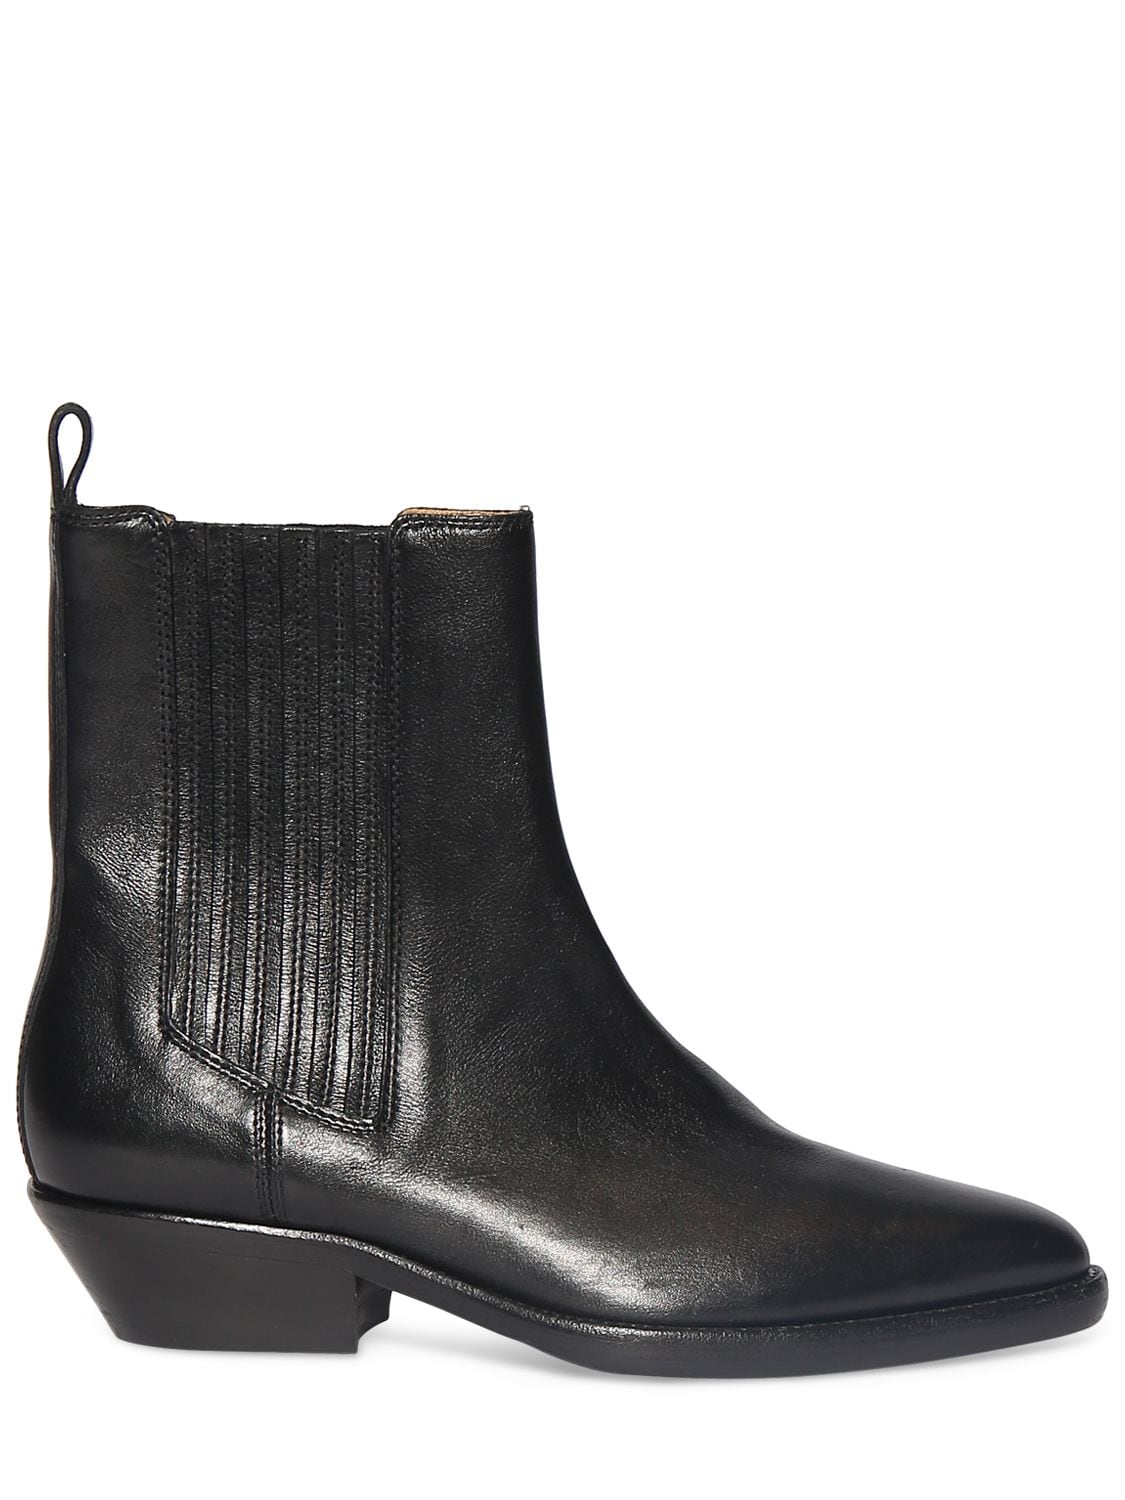 ISABEL MARANT 40MM DELENA LEATHER ANKLE BOOTS